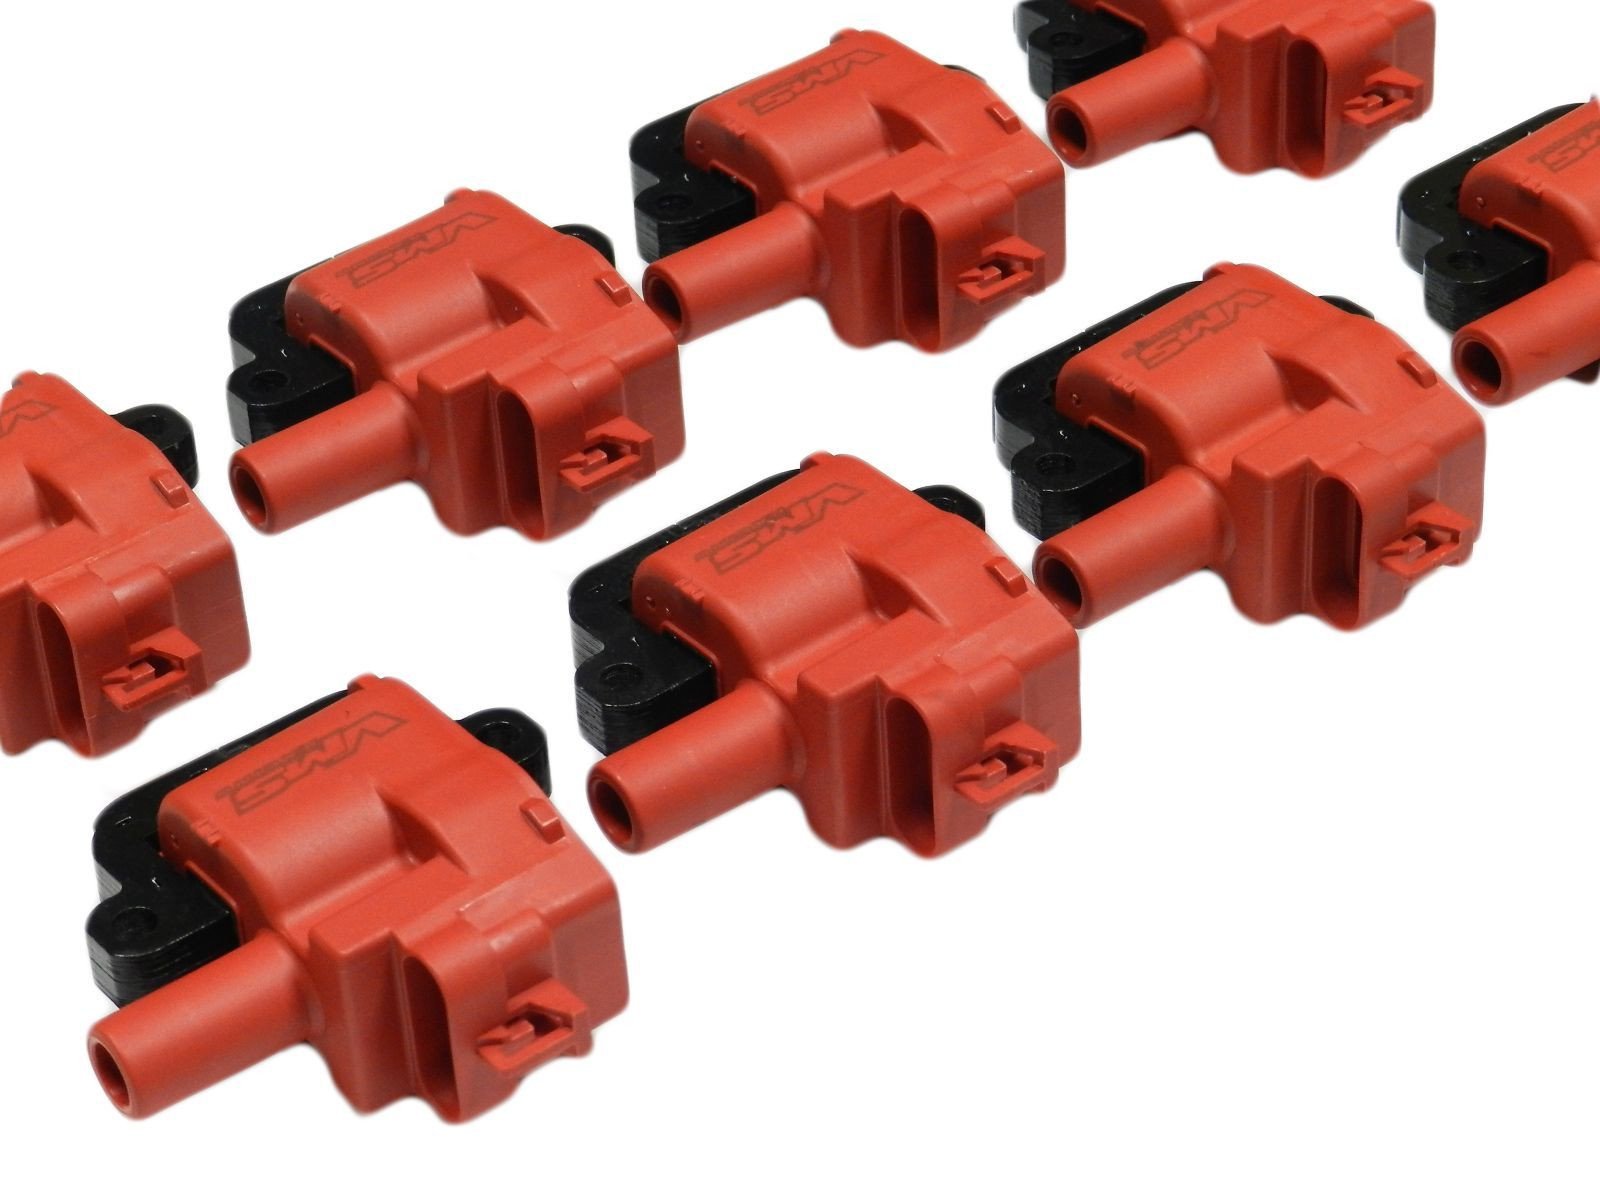 VMS STYLE Ignition Coil Pack Set of 8 for Camaro / Firebird, C5 Corvette LS1, LS6 1997-2002 D580 C1144 RED